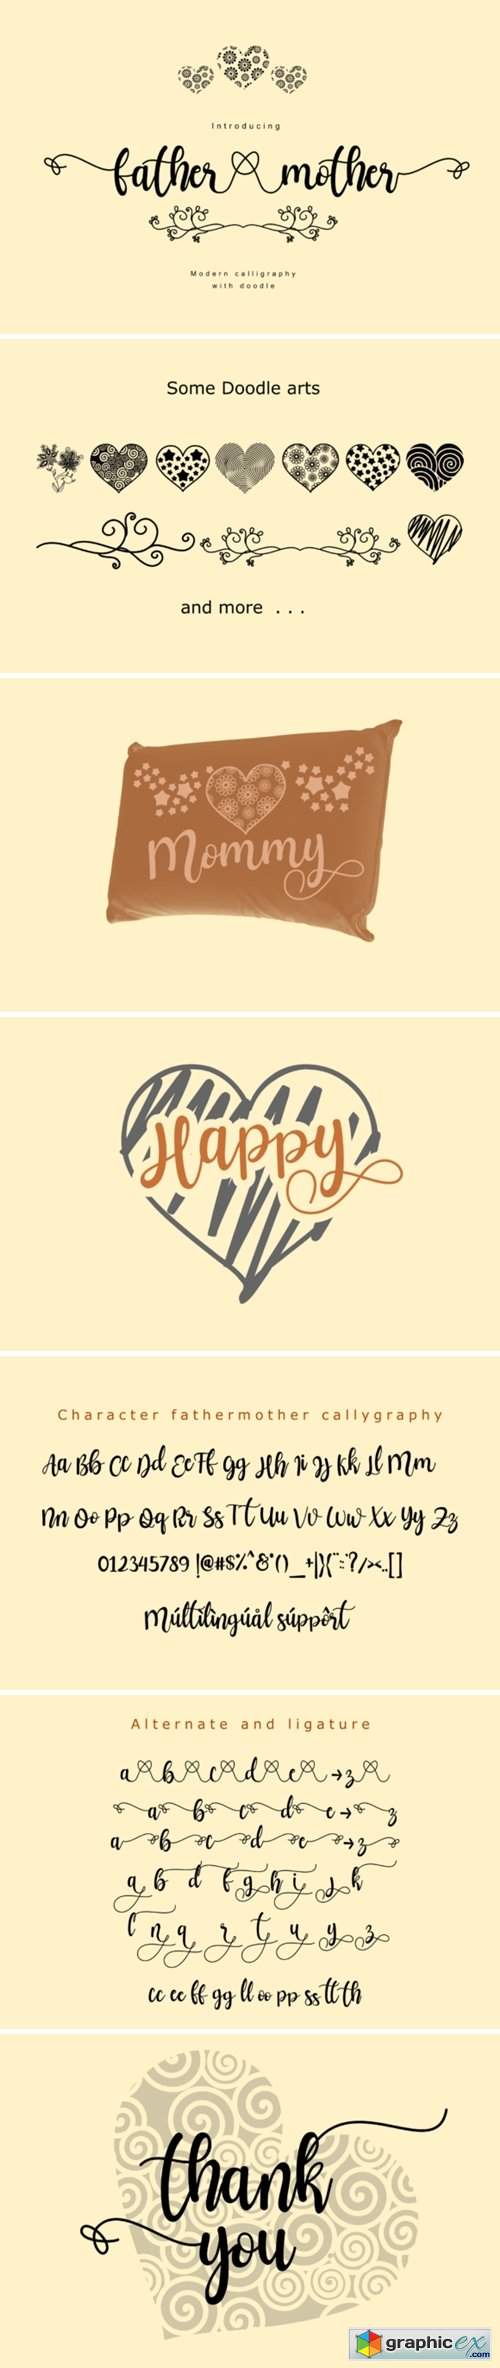  Father Mother Font 